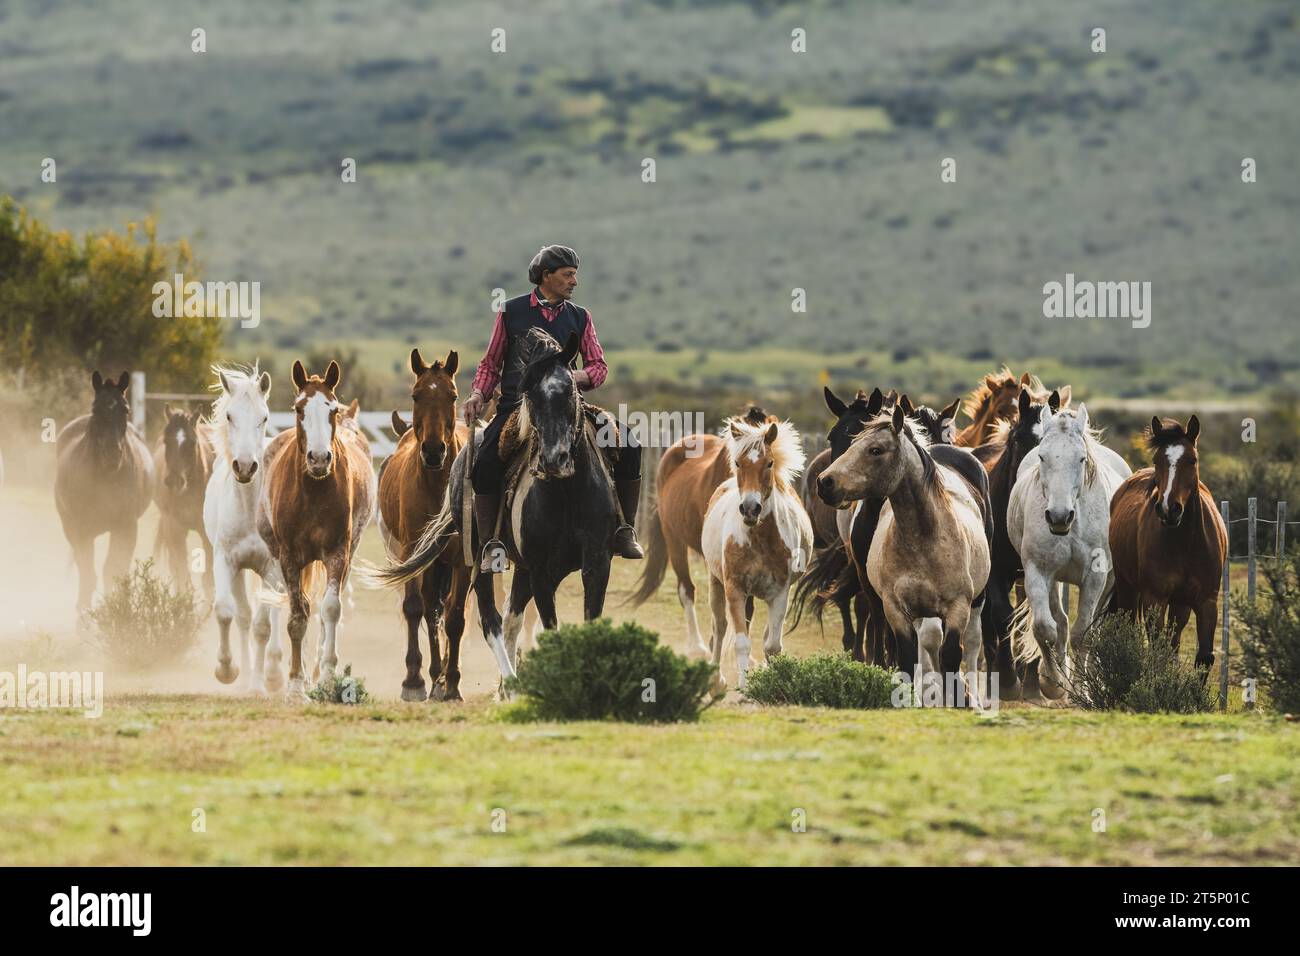 A Gaucho cowboy herding horses in South Argetina Stock Photo